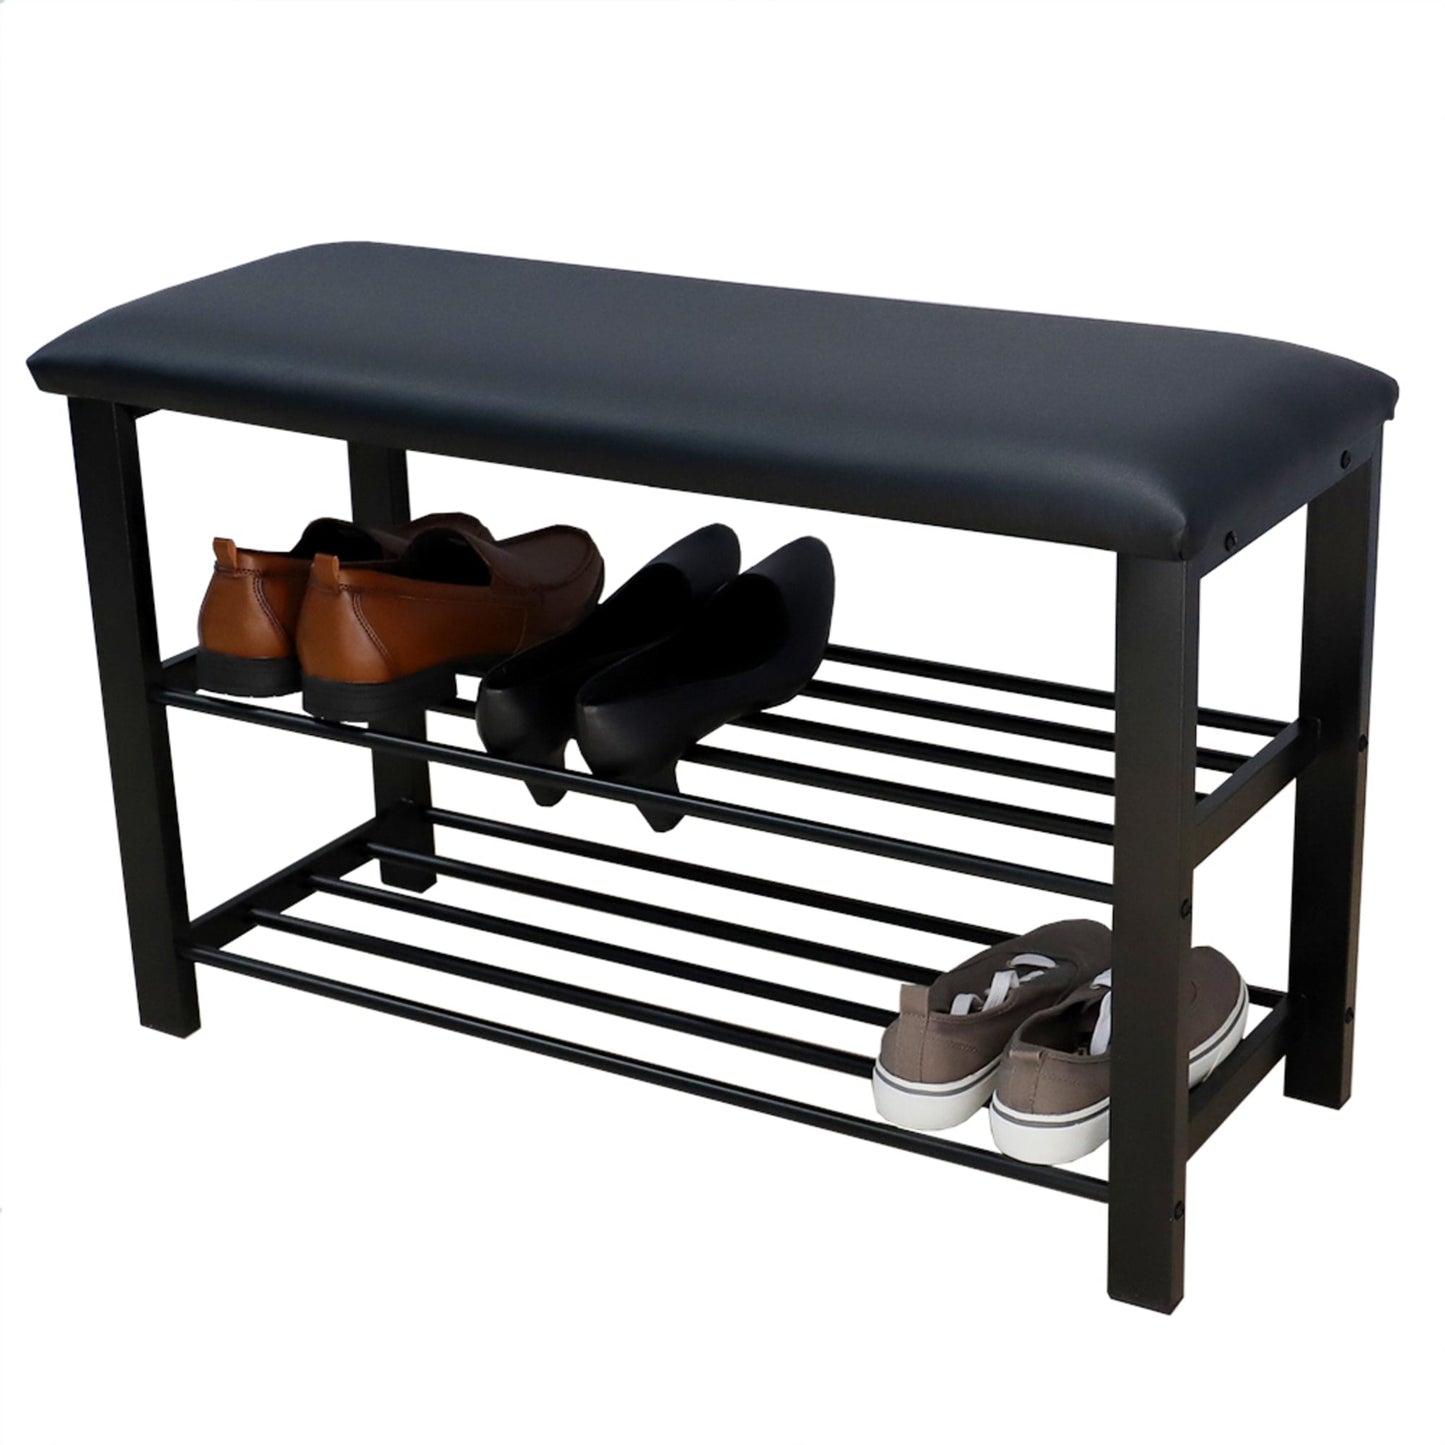 Cushioned Storage Bench with 2 Tier Steel Shoe Rack, Black